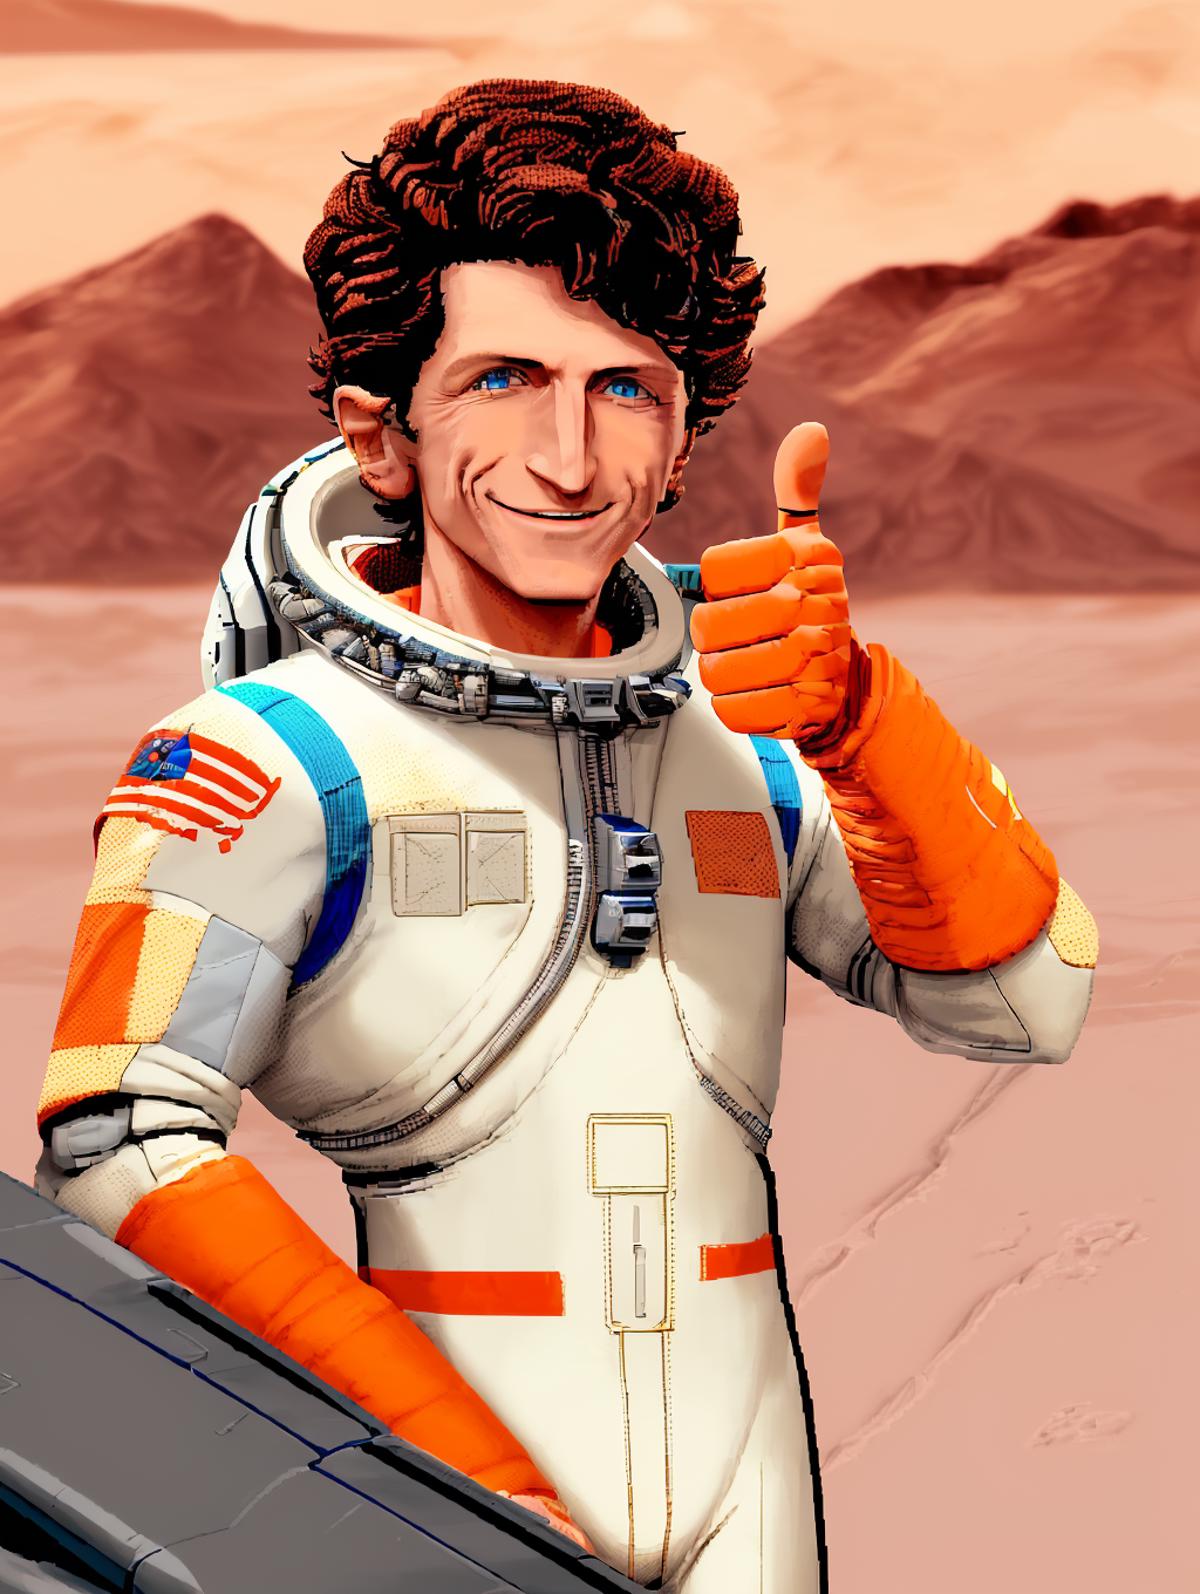 A cartoon illustration of a man wearing a space suit and giving a thumbs up.